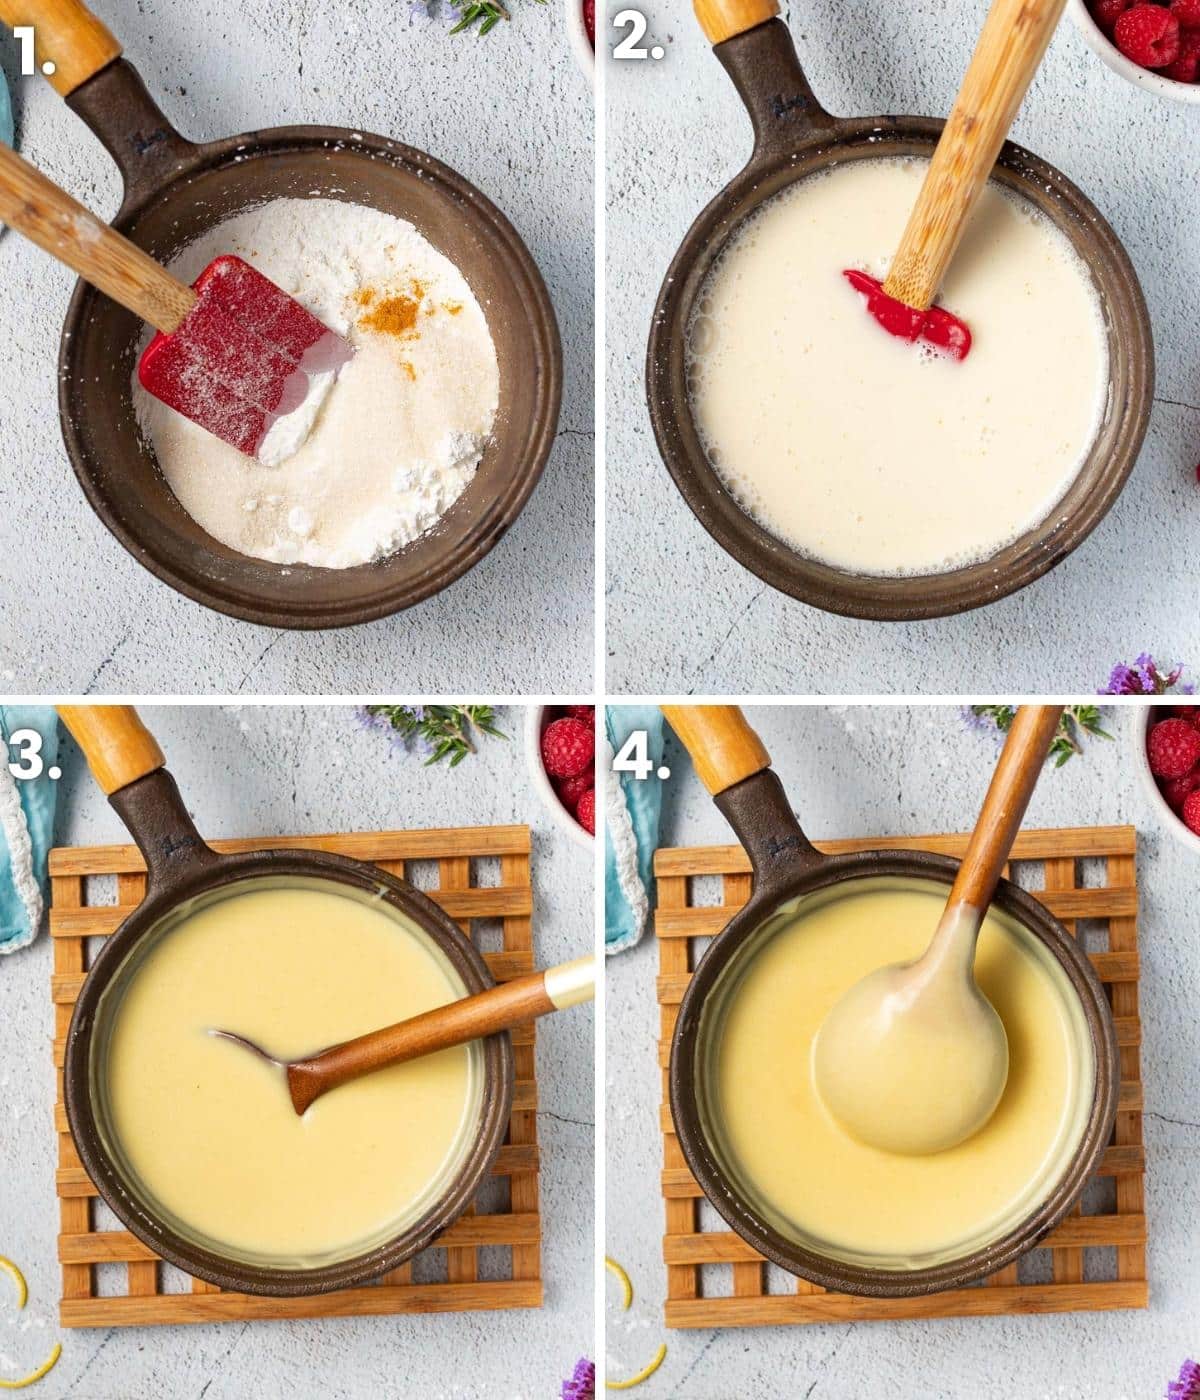 how to make vegan custard in step by step photos as per the written intructions